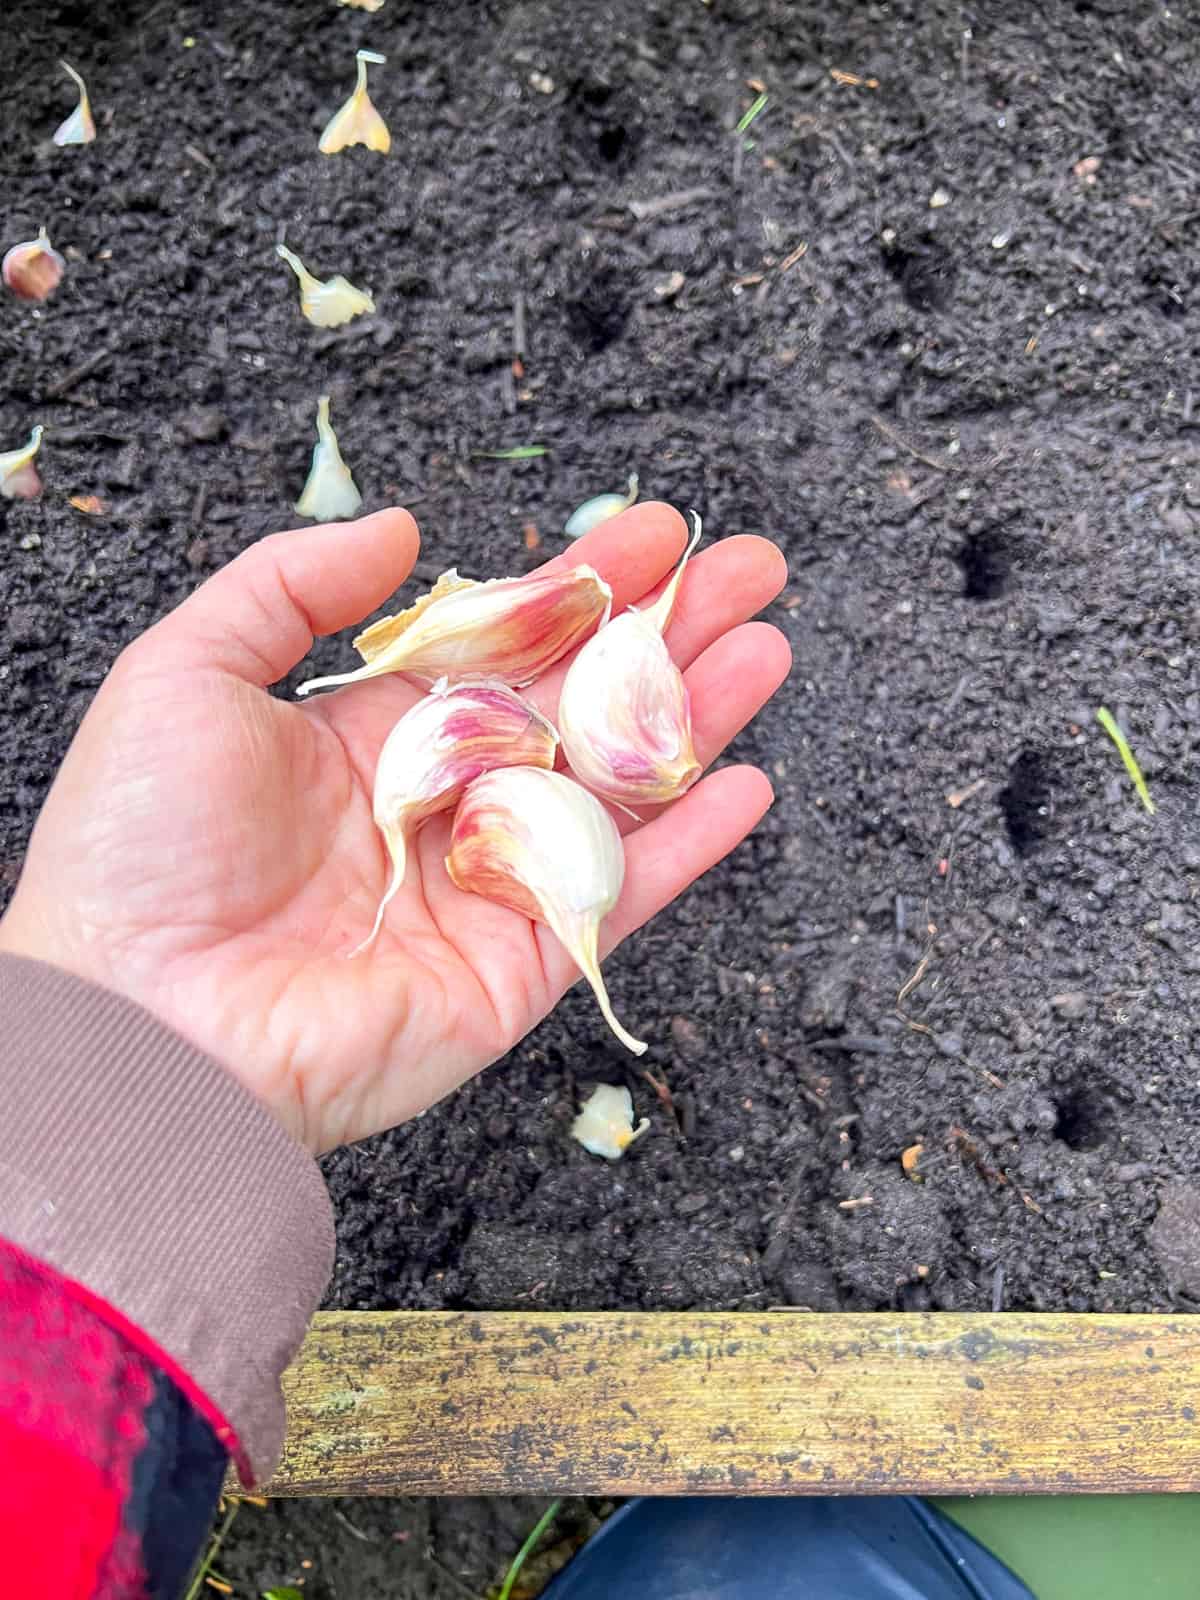 An image of a hand in the midst of planting garlic cloves, done after seasonal garden maintenance.